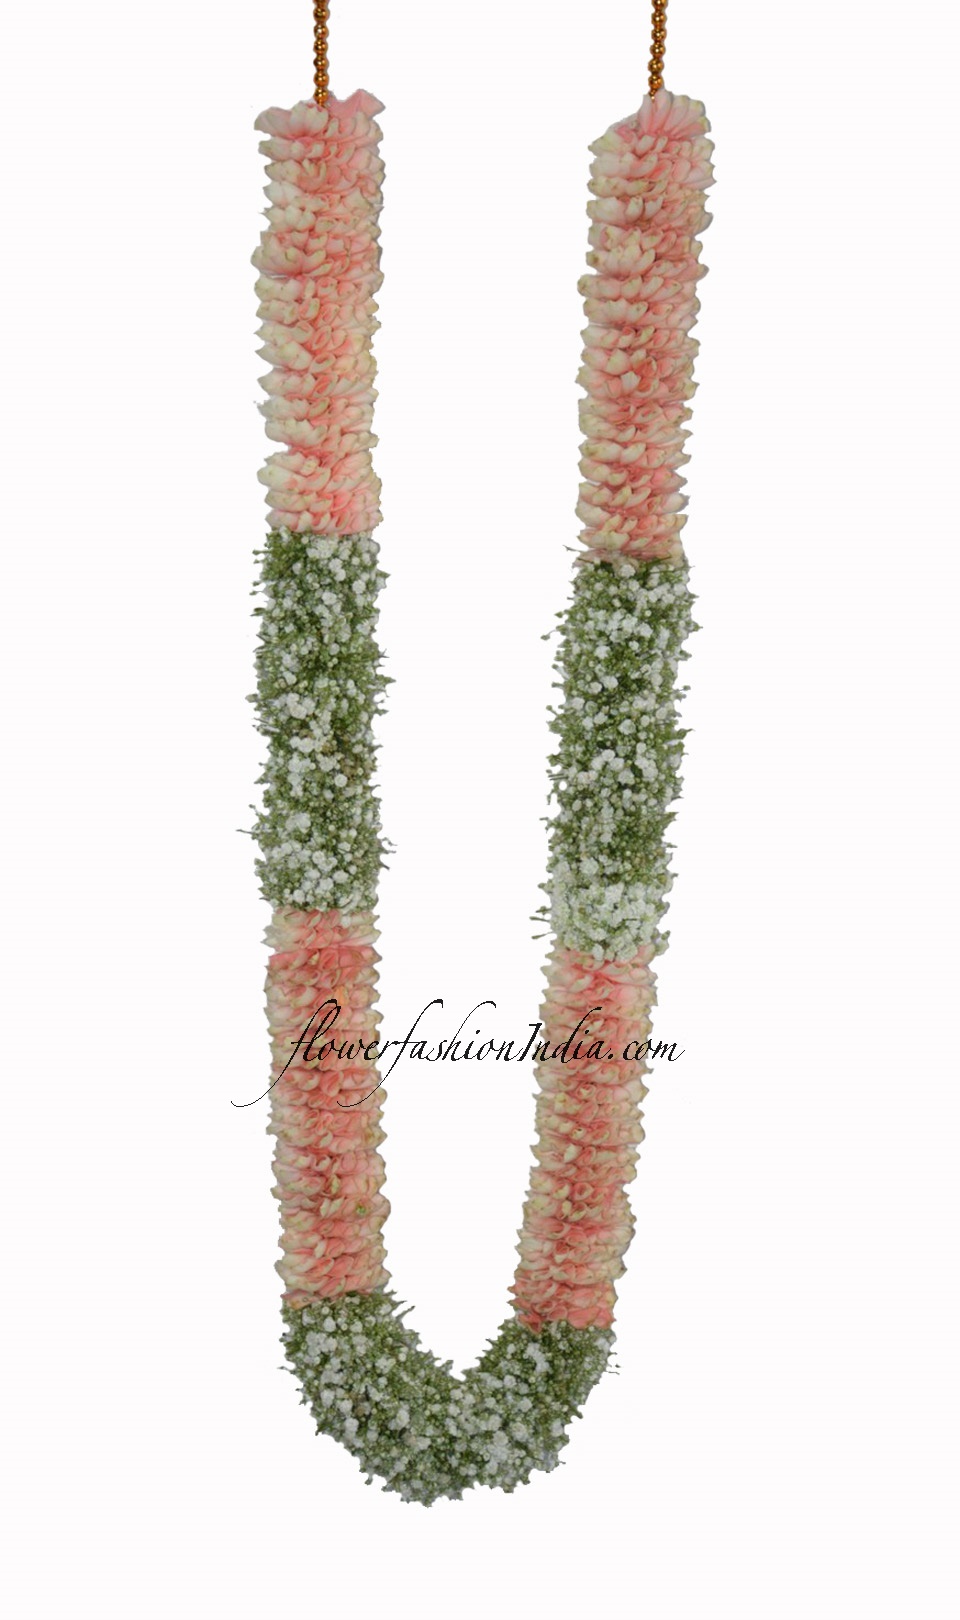 Natural Flower Wedding Garland Of Pink Rose Petals And Baby's Breath Online  (1 Pair)